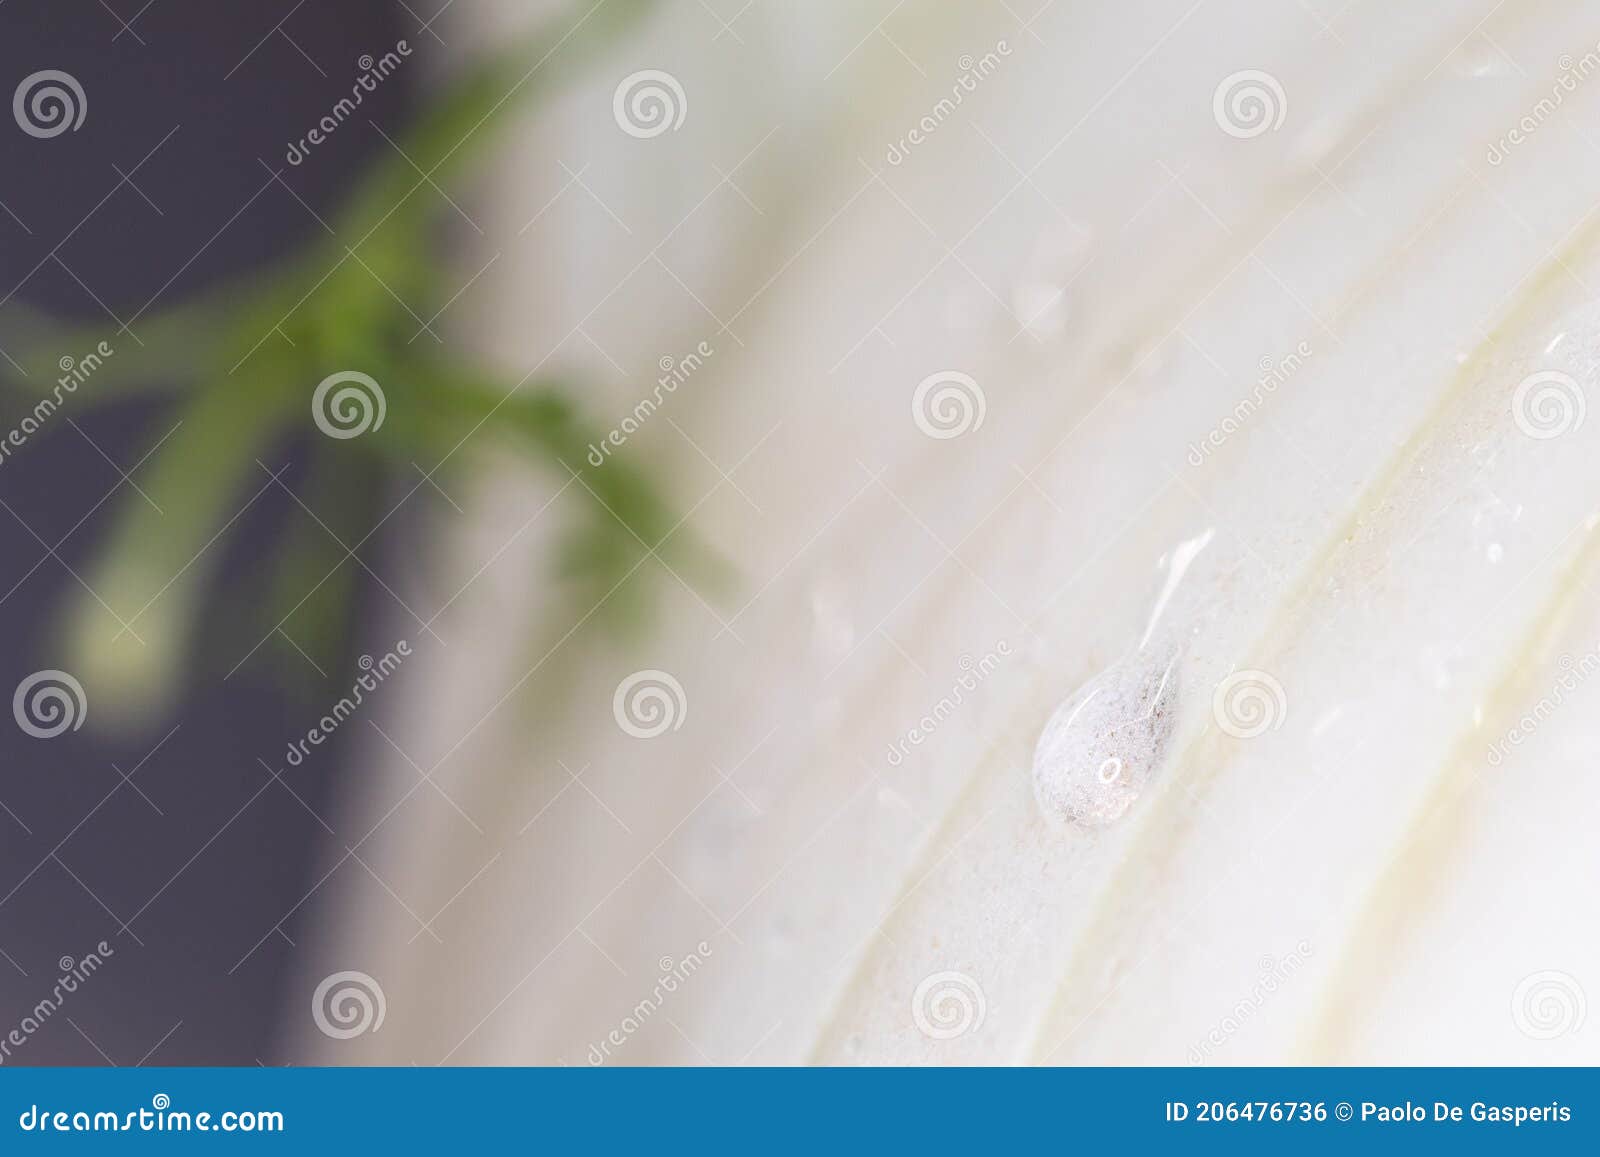 drop of water on fennel. macro close up of water drops on fresh fennl surface. healty vegano food